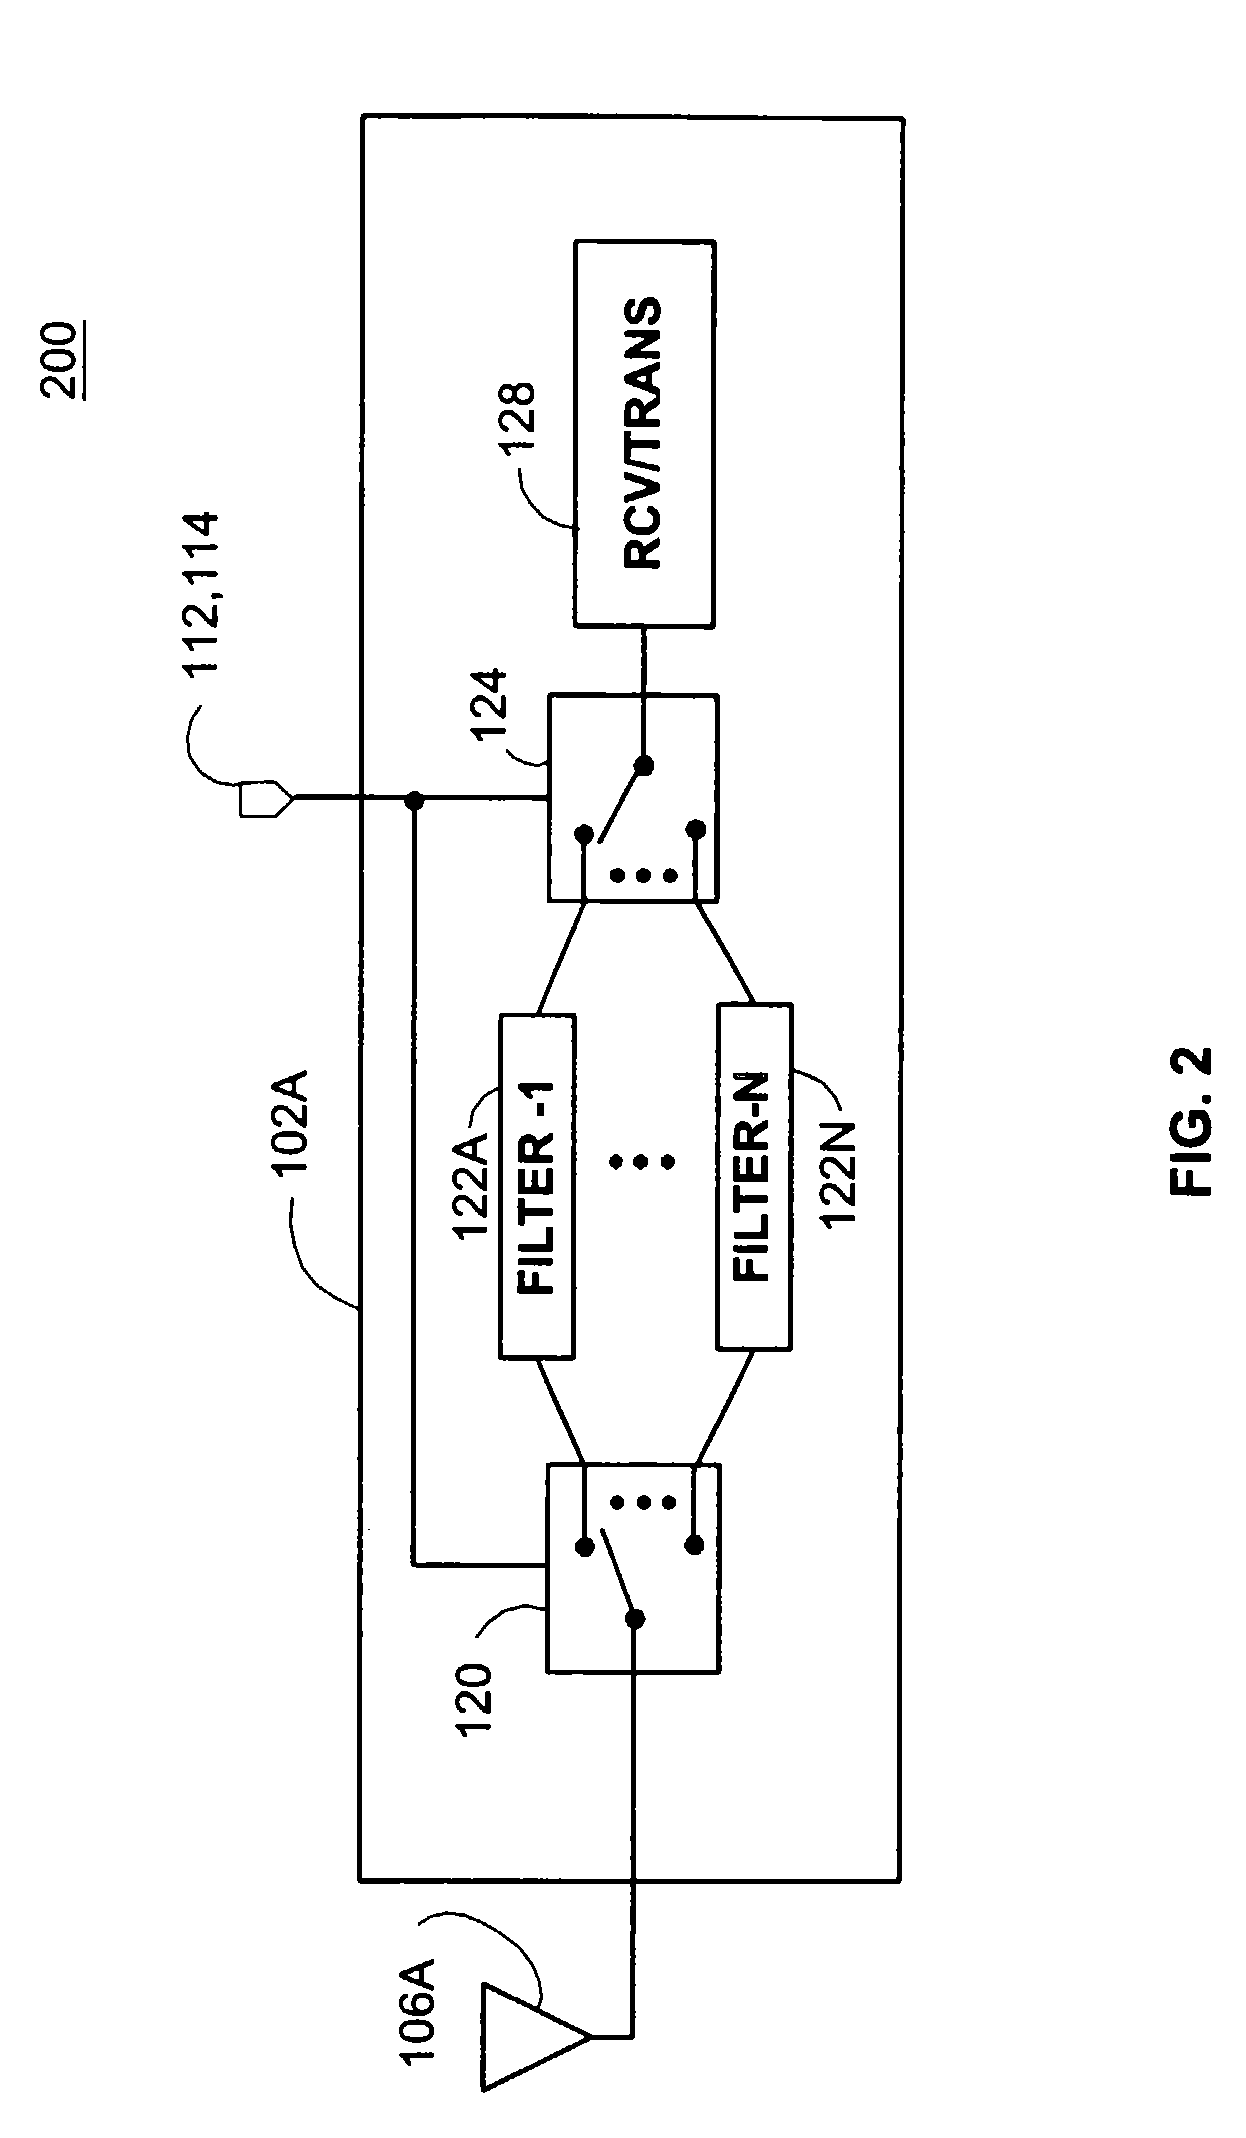 Method and apparatus for a signal selective RF transceiver system